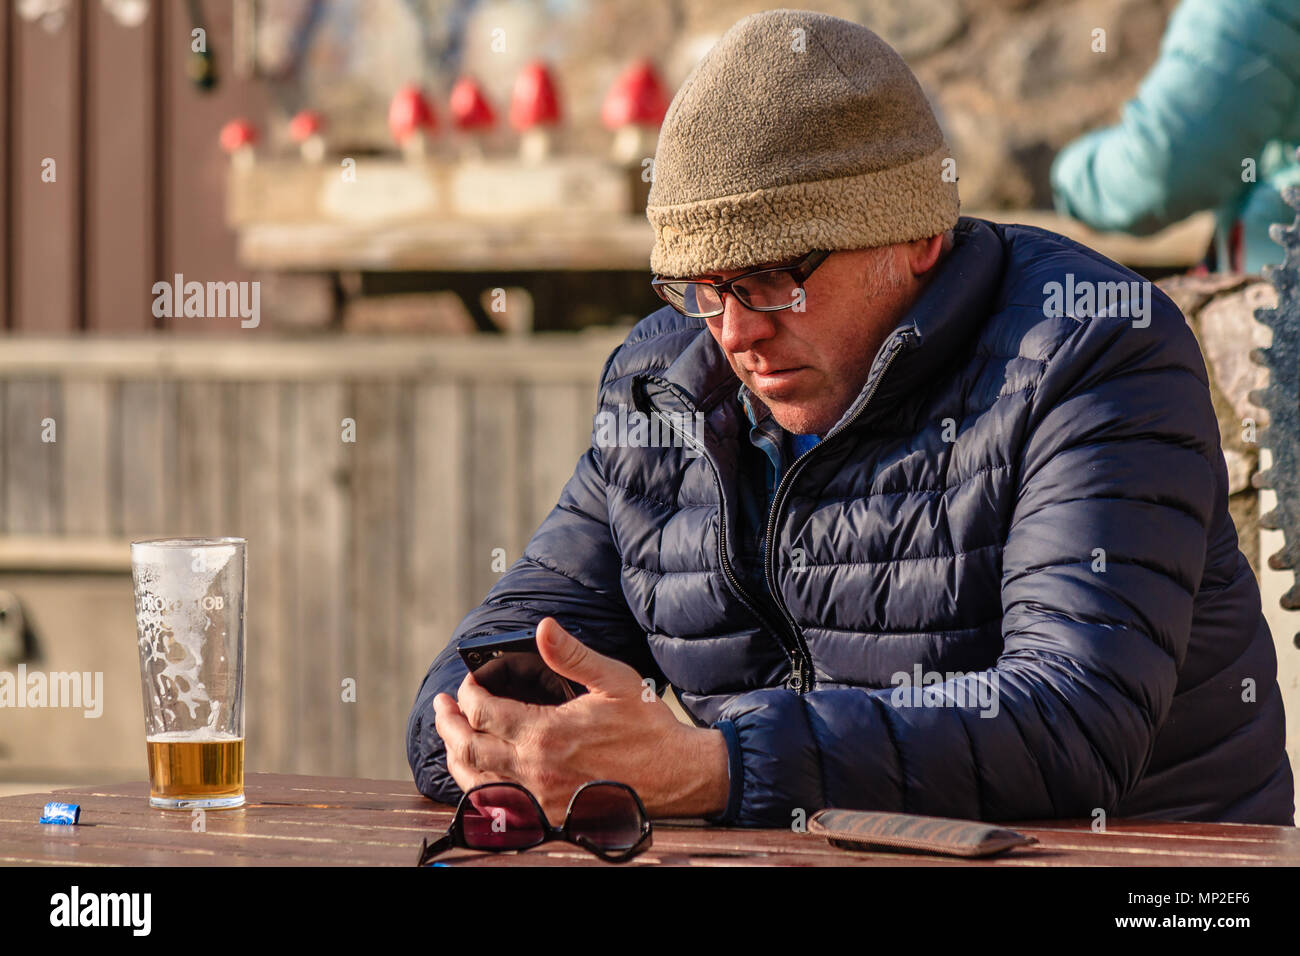 Man in warm coat and hat sat outside a pub with a nearly finished pint of beer and using a mobile phone. Teignmouth, Devon. Feb 2018. Stock Photo